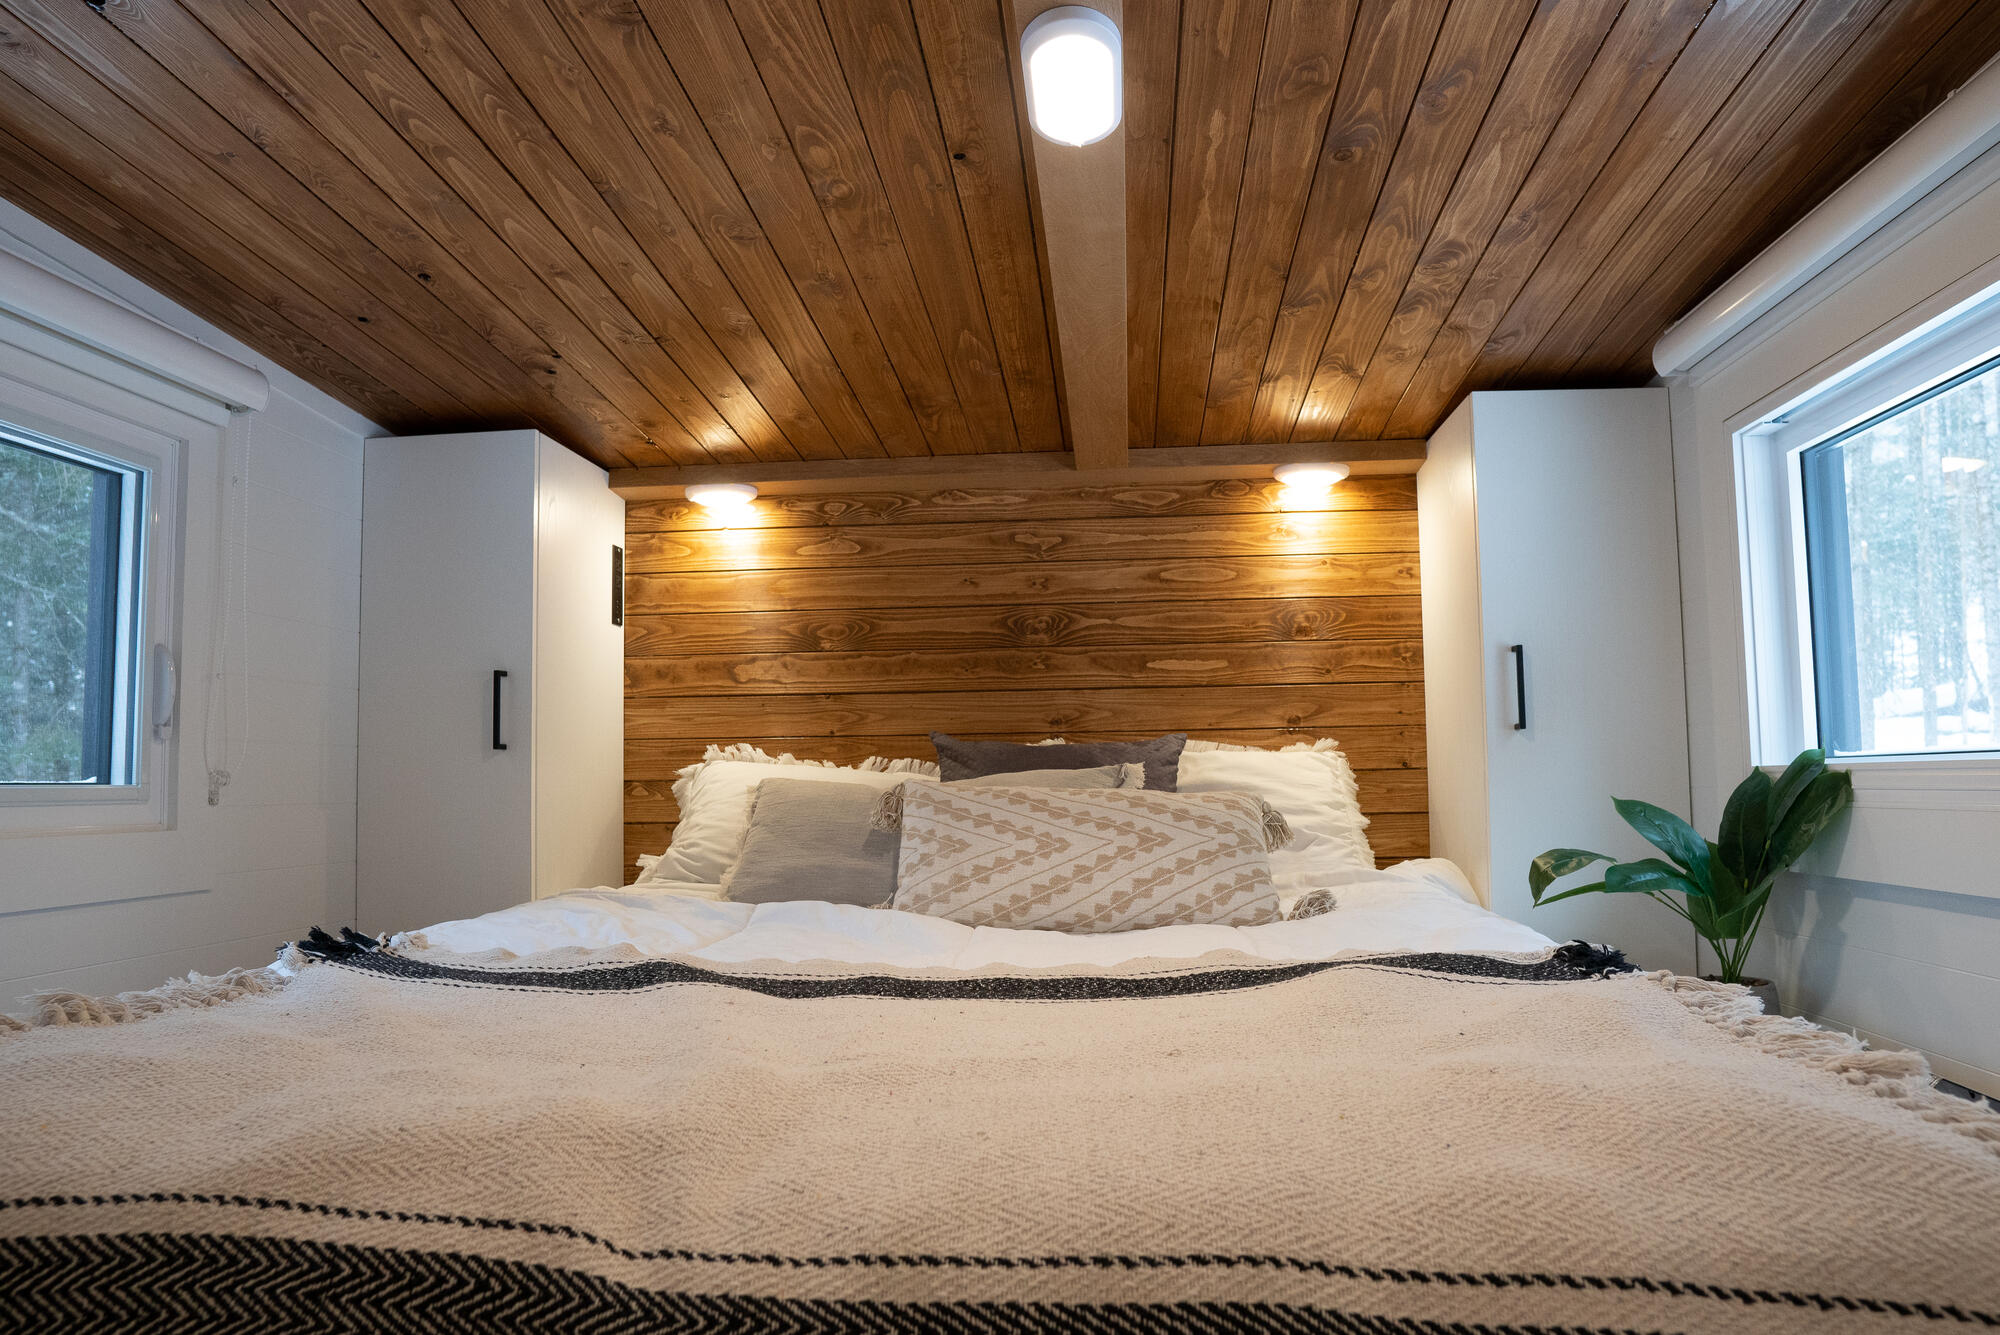 Bedroom With Closets - Nomad 5th Wheel by Minimaliste